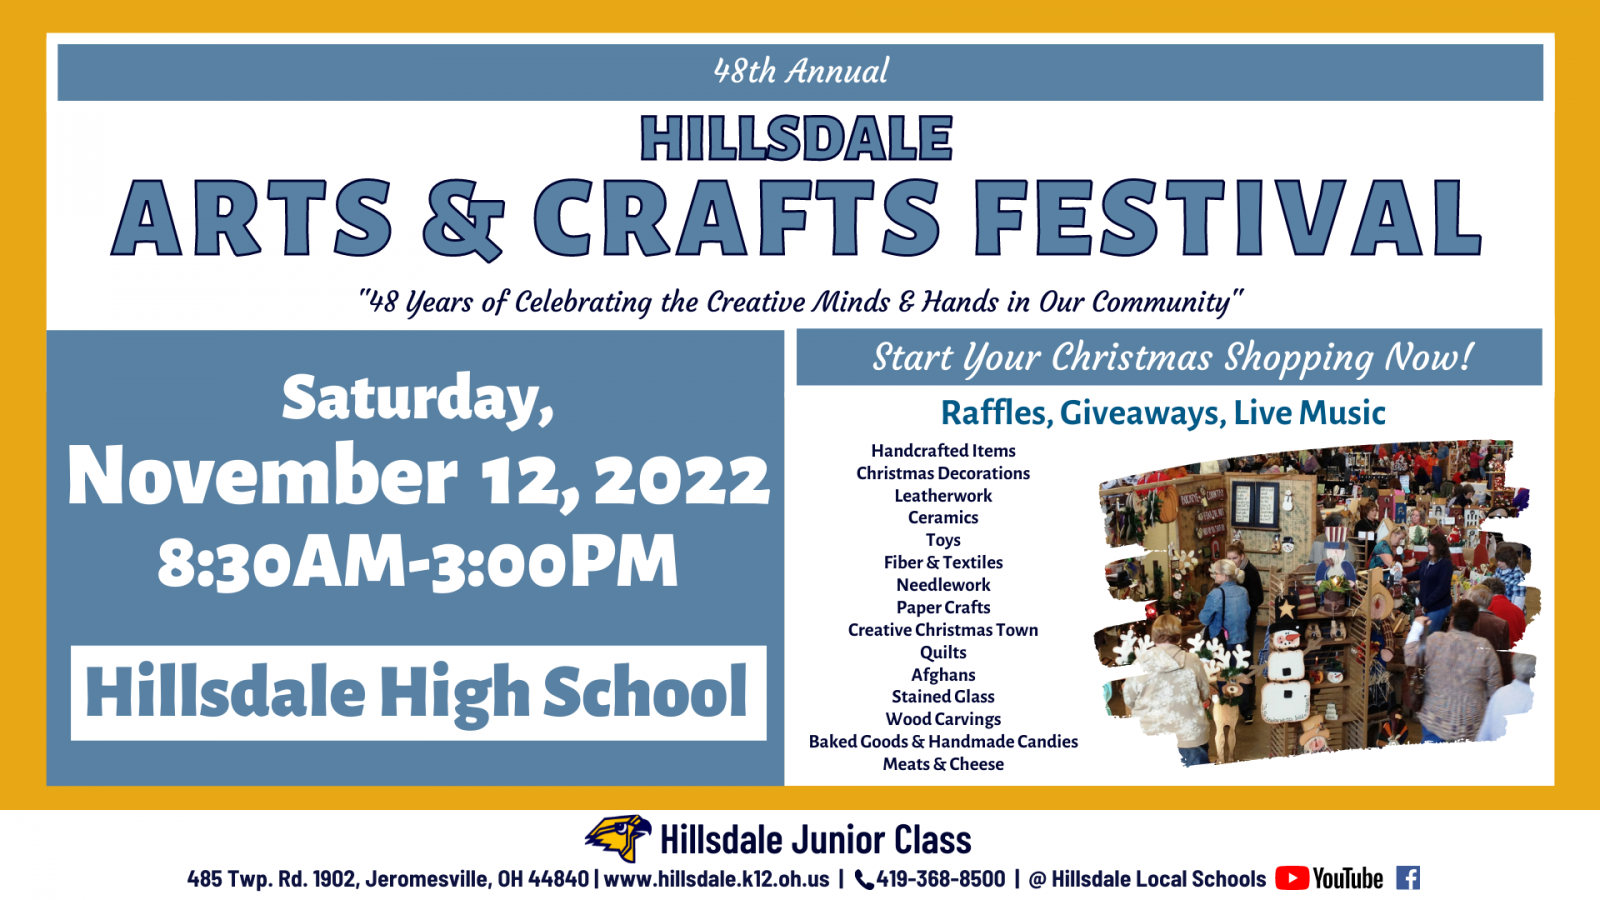 "48th Annual Hillsdale Arts & Crafts Festival; '48 Years of Celebrating the Creative Minds and Hands in the Community;' Saturday, November 12, 2022, 8:30 AM to 3 PM Hillsdale High School; 'Start Your Christmas Shopping Now!' Raffles, Giveaways, Live Music; with a list of vendor categories. Hillsdale Junior Class, 485 Twp. Rd. 1902, Jeromesville, Ohio 44840, 419-368-6841, @Hillsdale Local Schools on YouTube and Facebook.